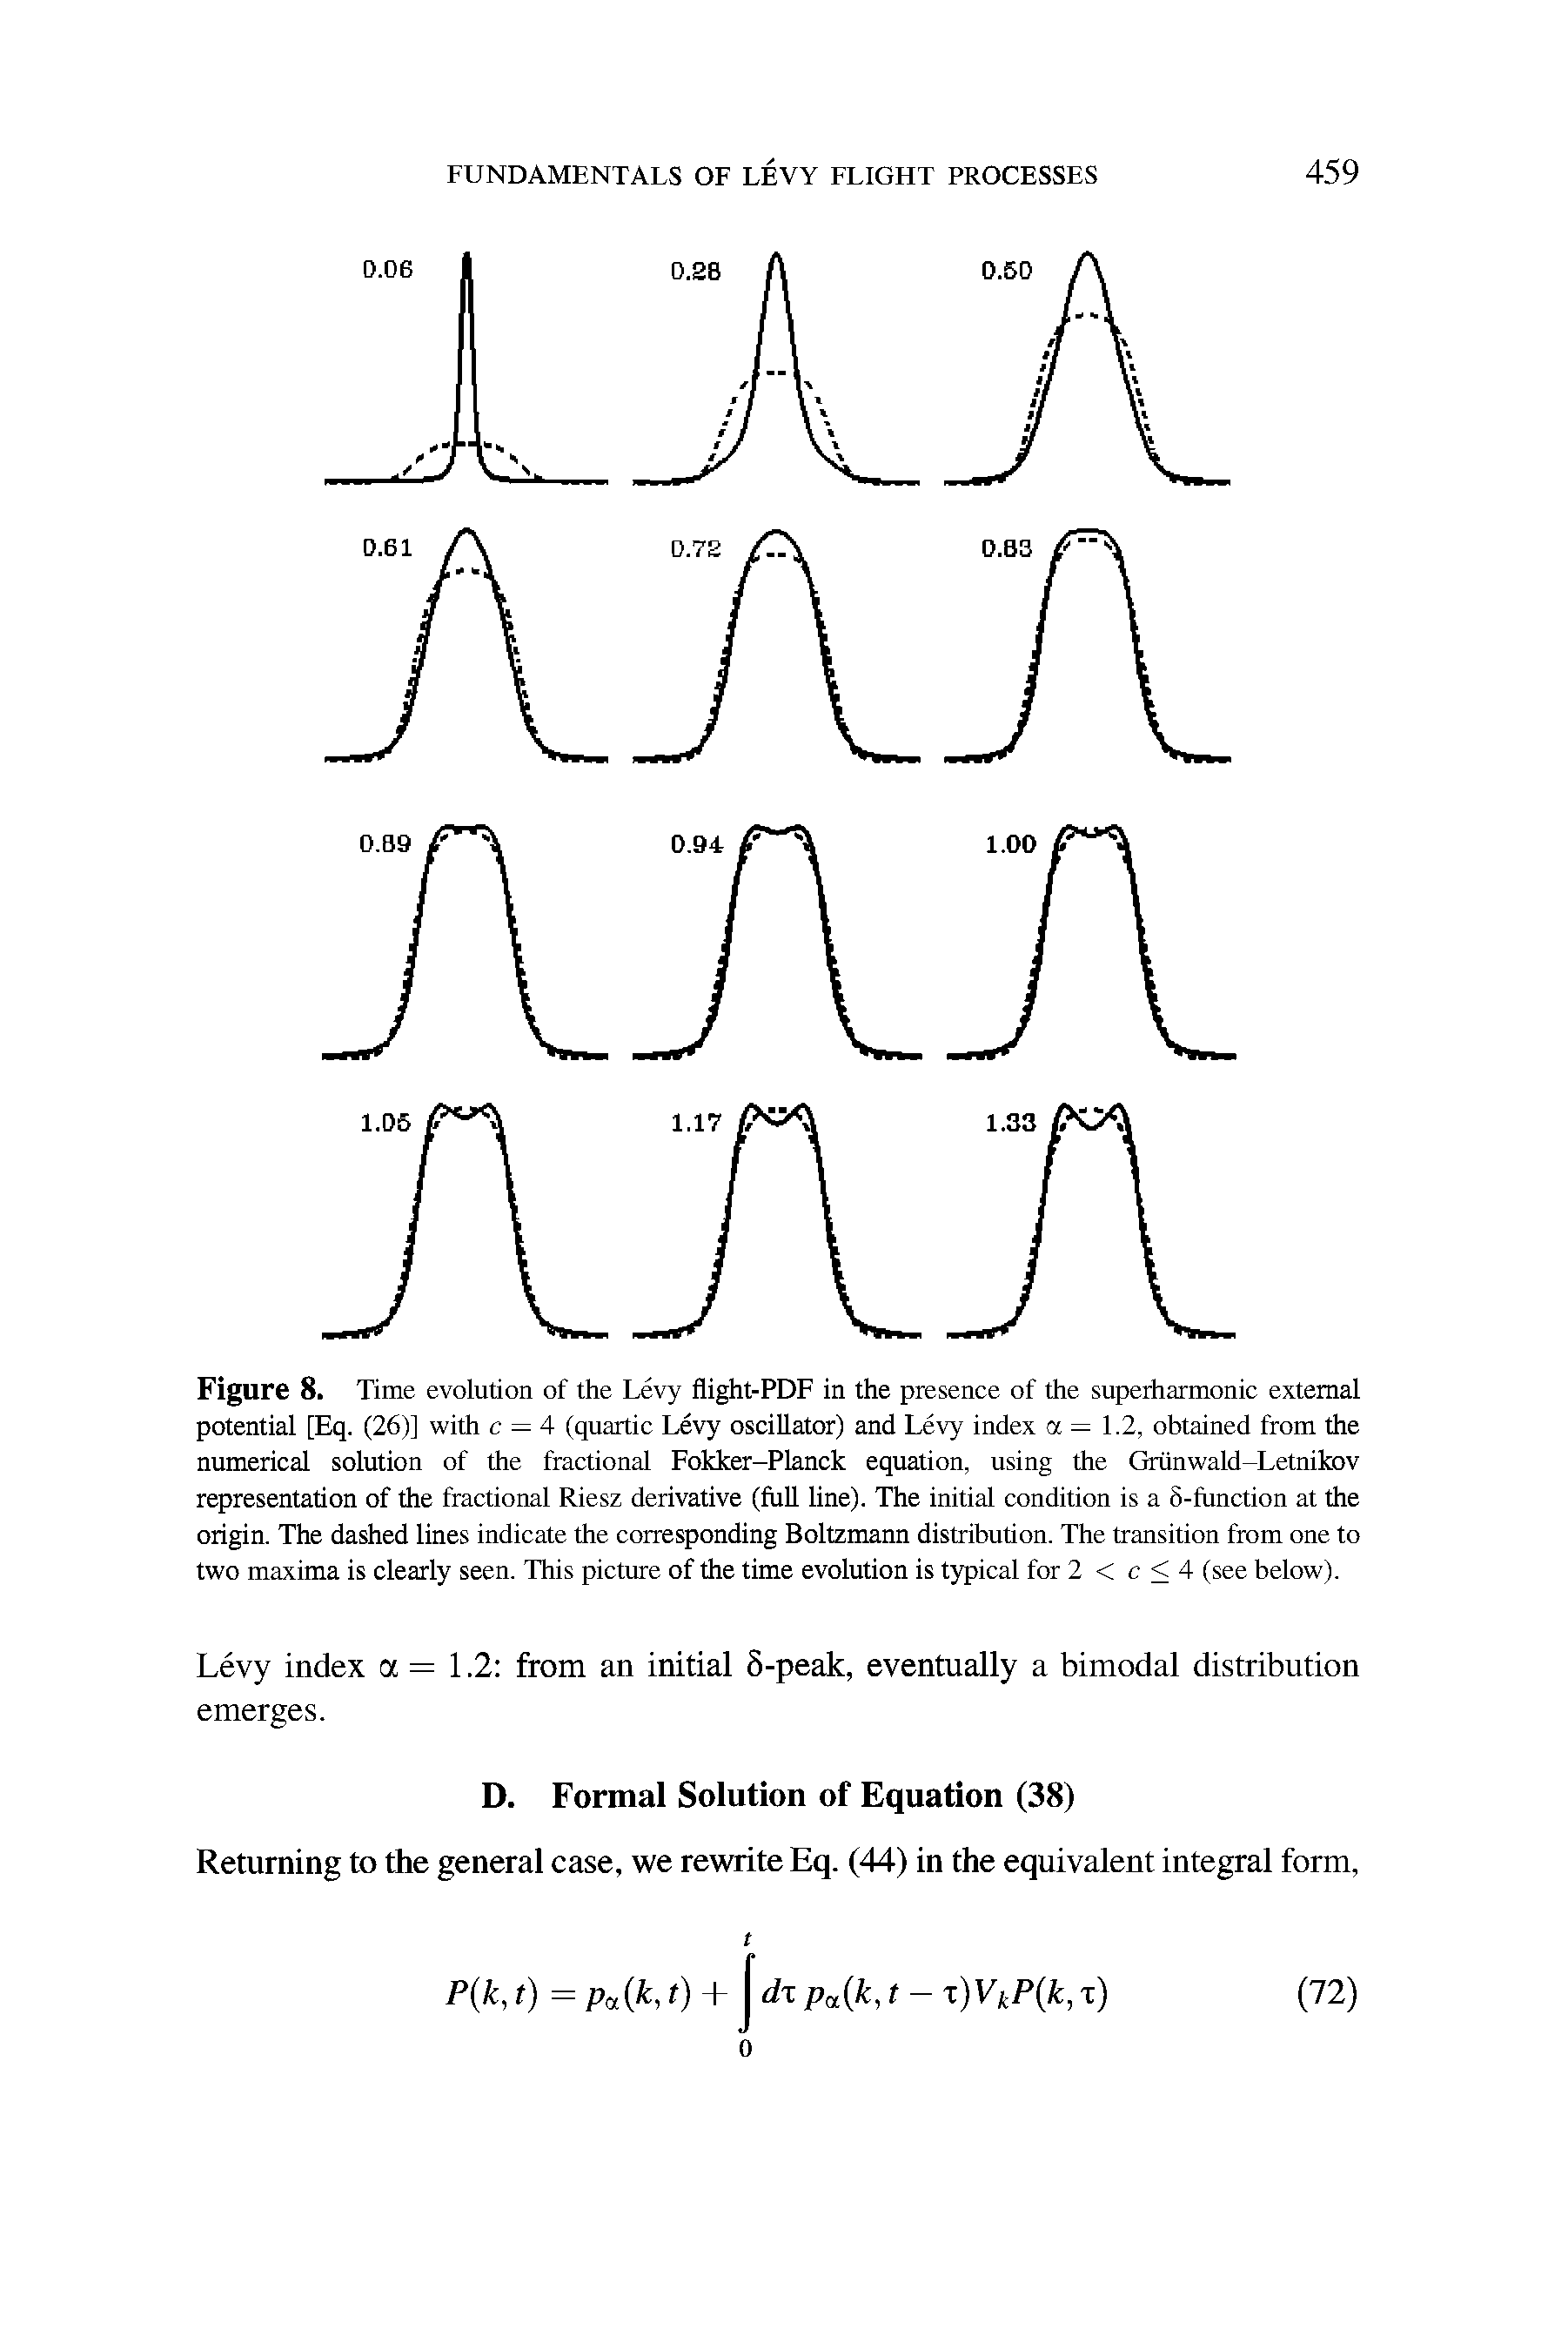 Figure 8. Time evolution of the Levy flight-PDF in the presence of the superharmonic external potential [Eq. (26)] with c — 4 (quartic Levy oscillator) and Levy index a = 1.2, obtained from the numerical solution of the fractional Fokker-Planck equation, using the Griinwald-Letnikov representation of the fractional Riesz derivative (full line). The initial condition is a 8-function at the origin. The dashed lines indicate the corresponding Boltzmann distribution. The transition from one to two maxima is clearly seen. This picture of the time evolution is typical for 2 < c <4 (see below).